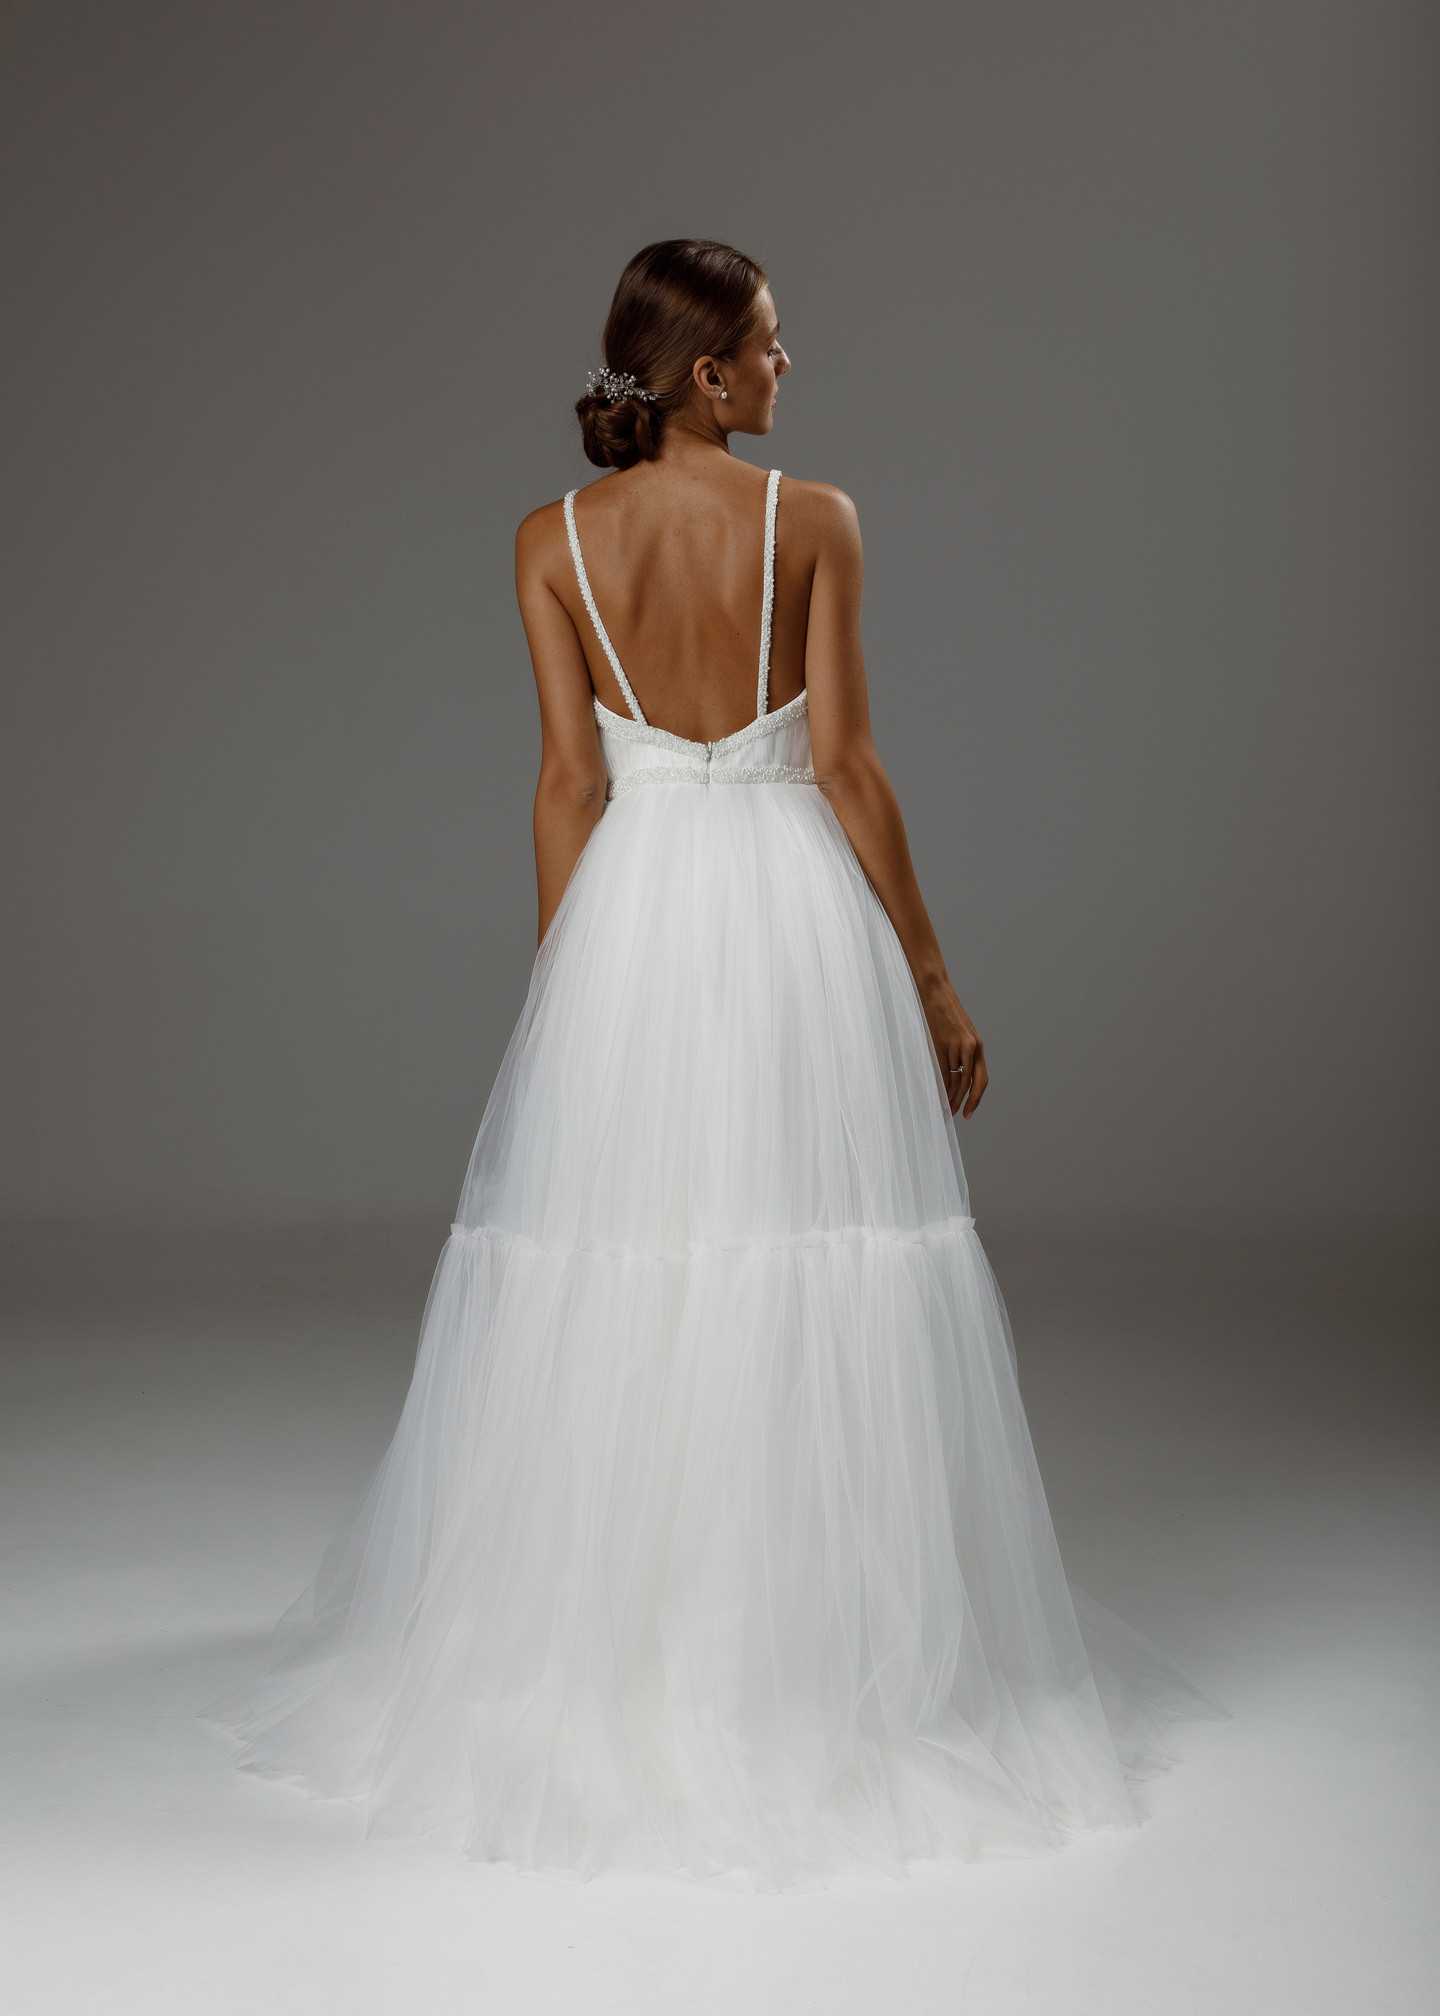 Lea gown, 2020, couture, dress, bridal, off-white, tulle, embroidery, A-line, popular